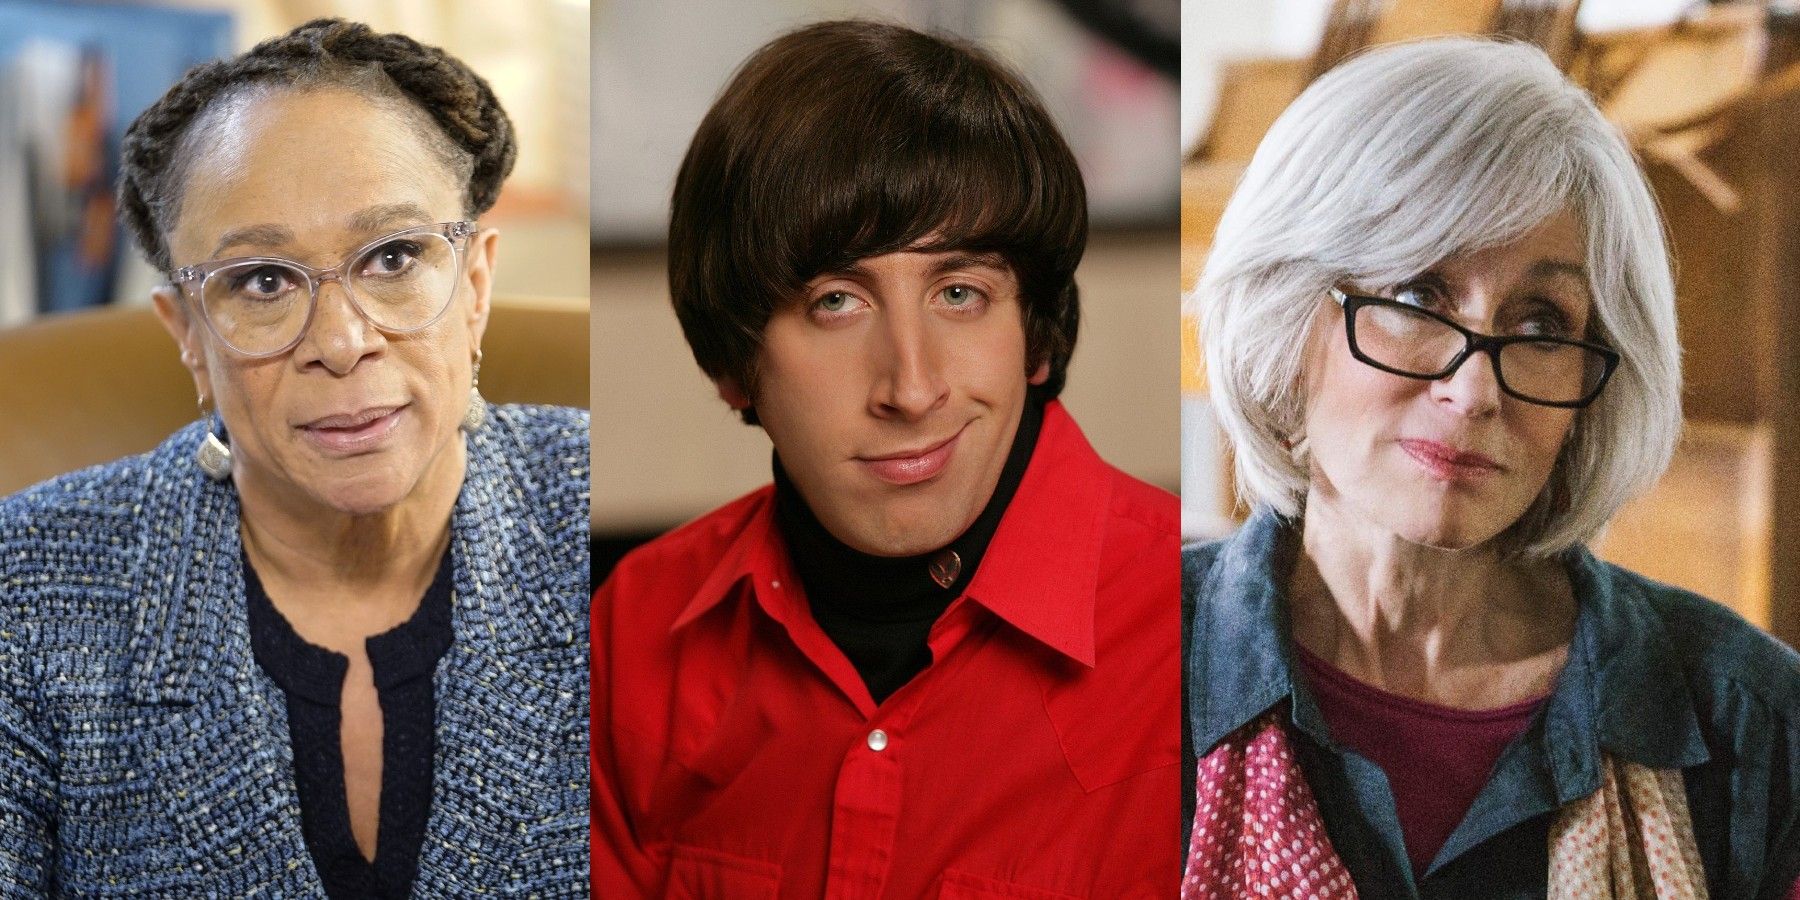 Big Bang Theory Star Simon Helberg And Others Join Rian Johnson's Poker Face Series